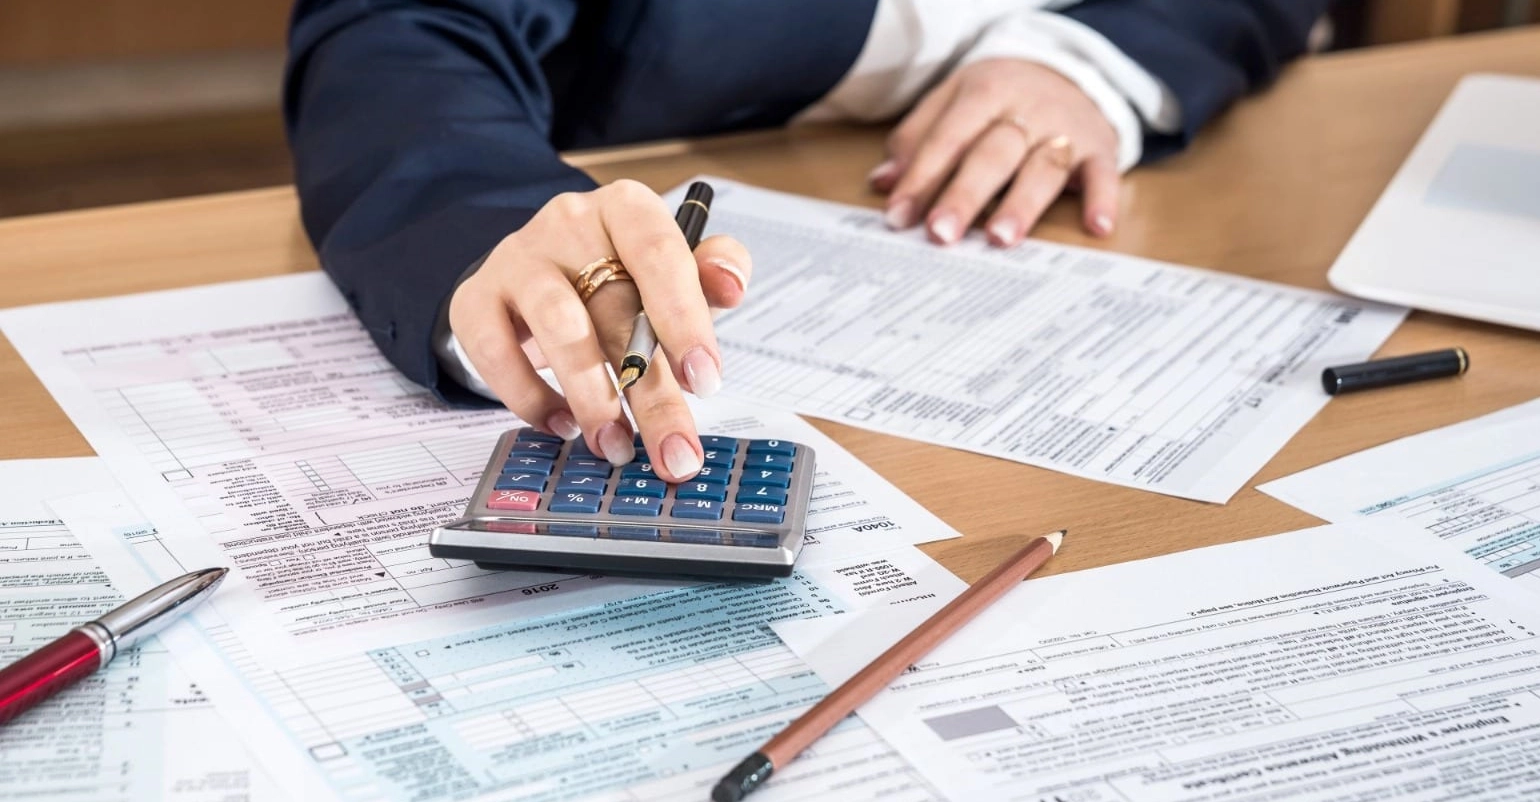 Benefits of Working with a Professional Accounting and Audit Firm